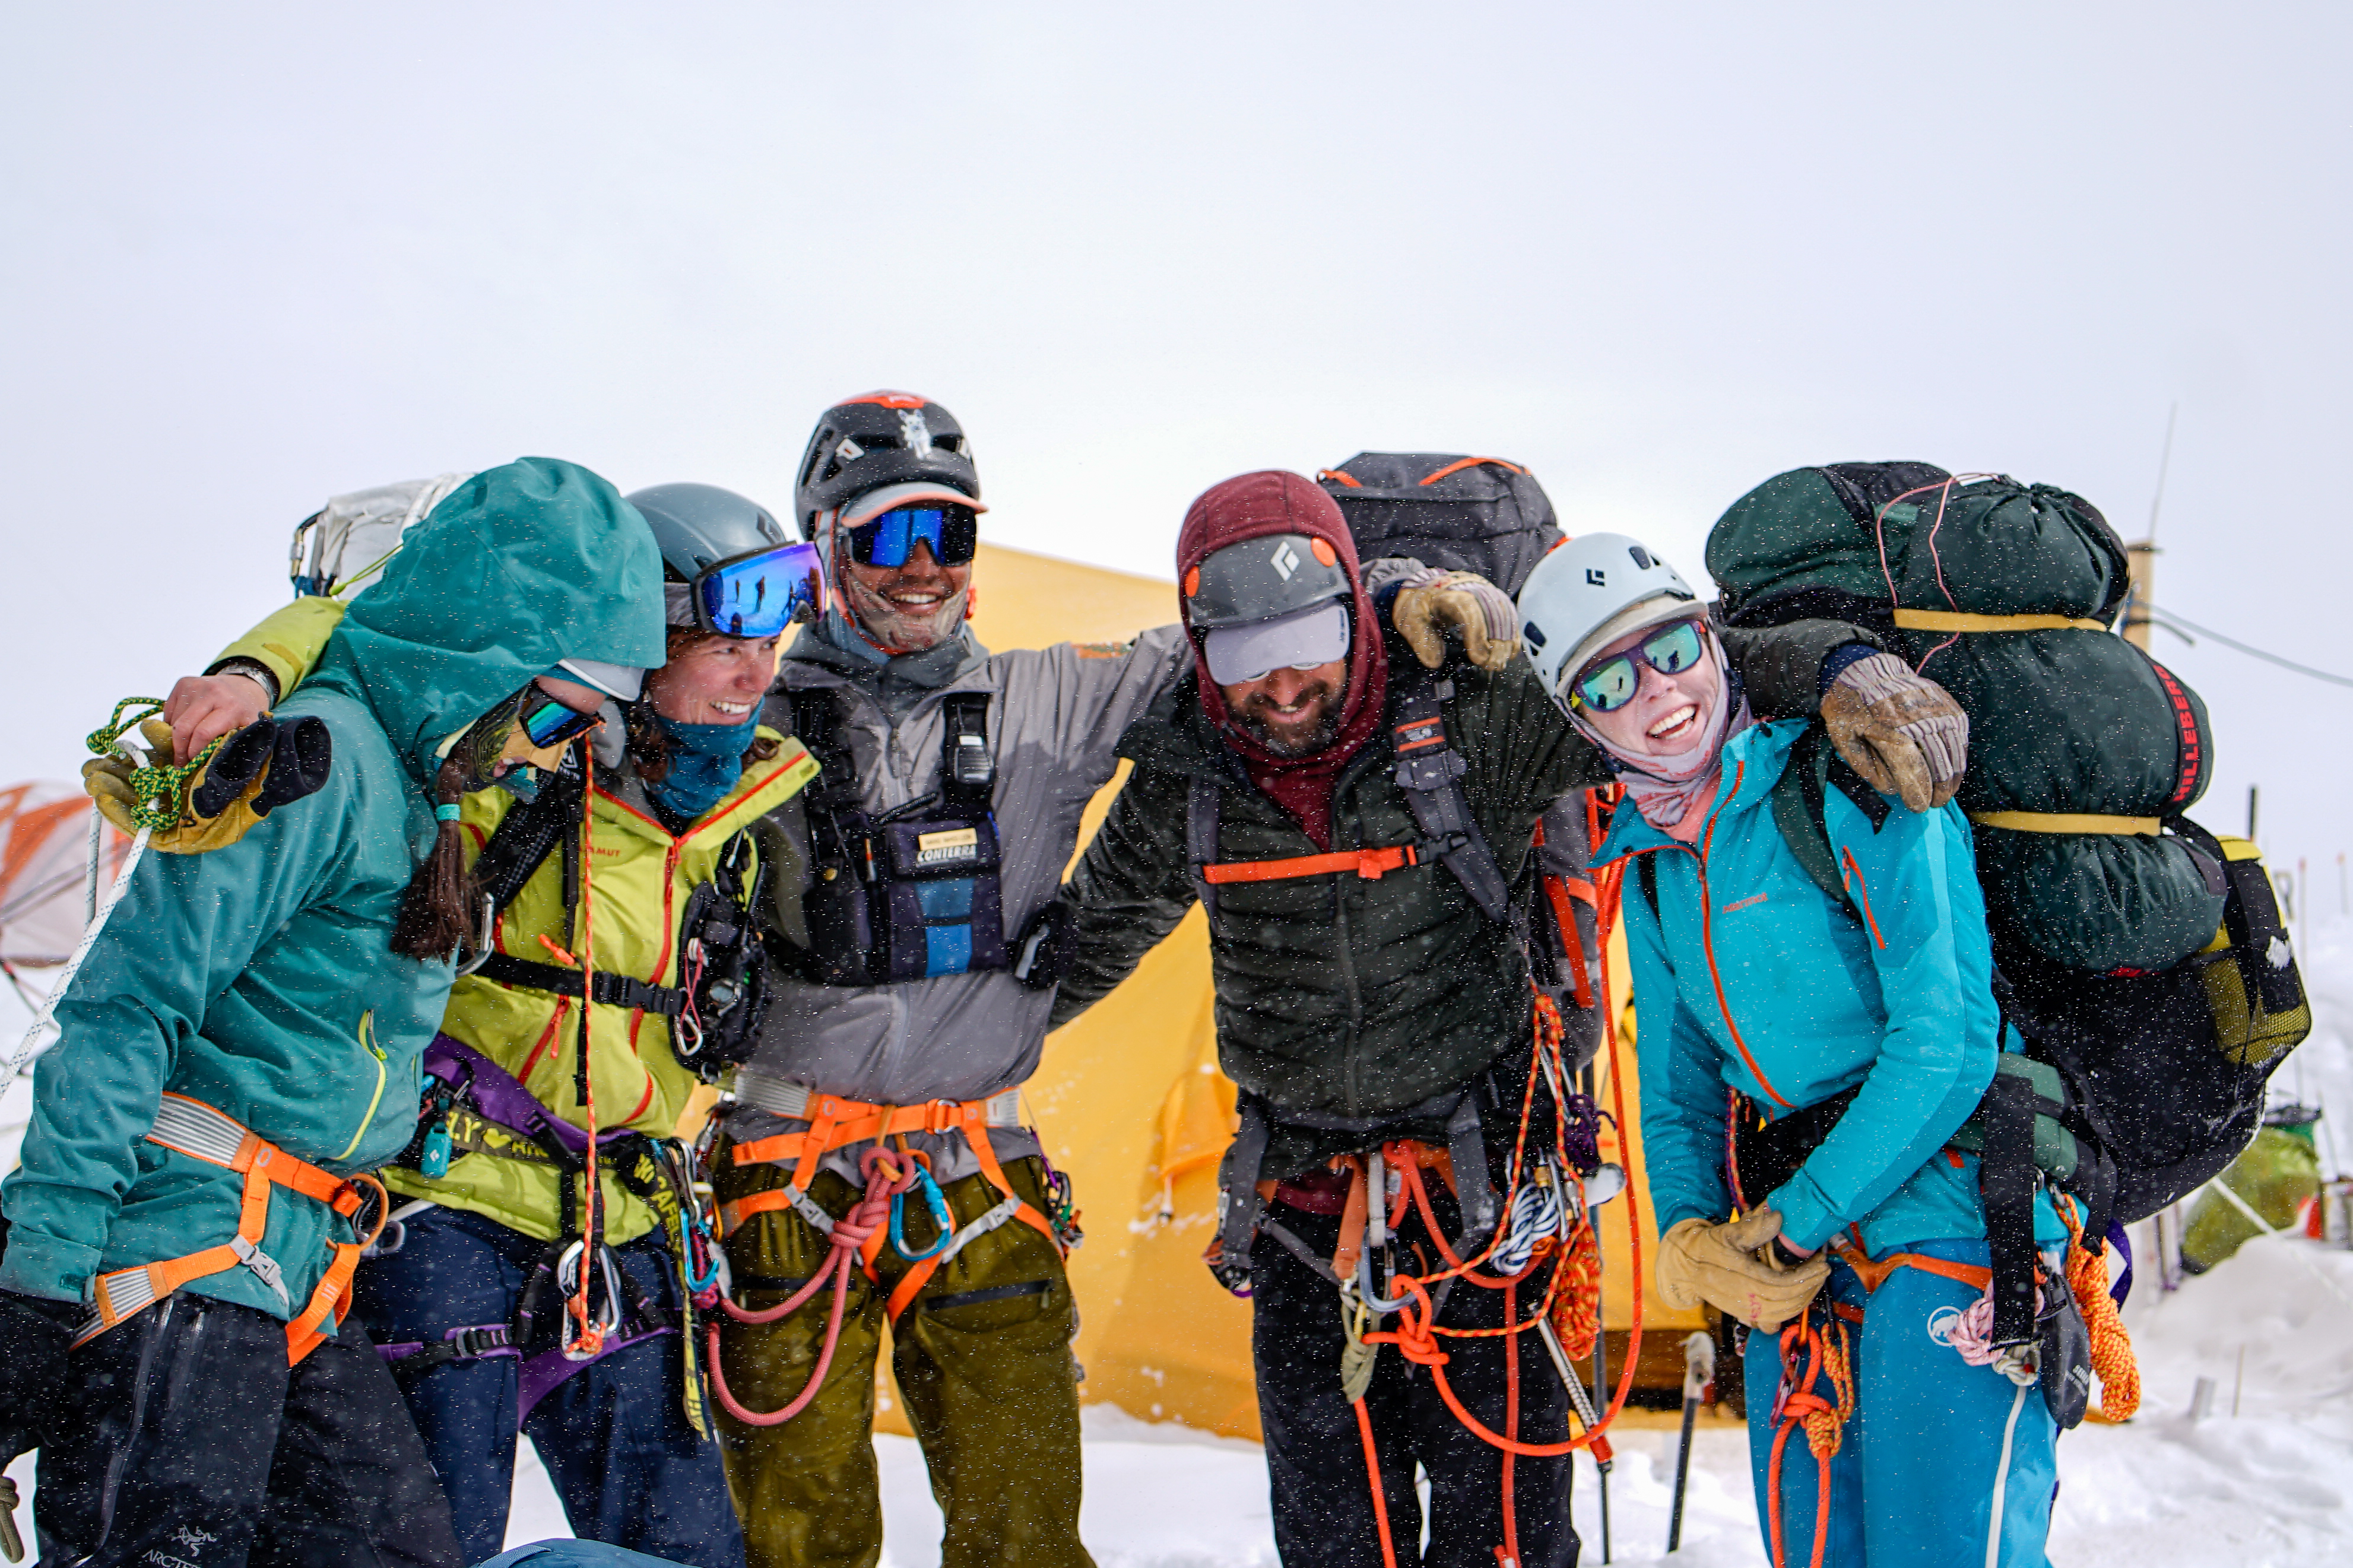 Five helmeted and harnessed climbers carrying big backpacks pause for a photo